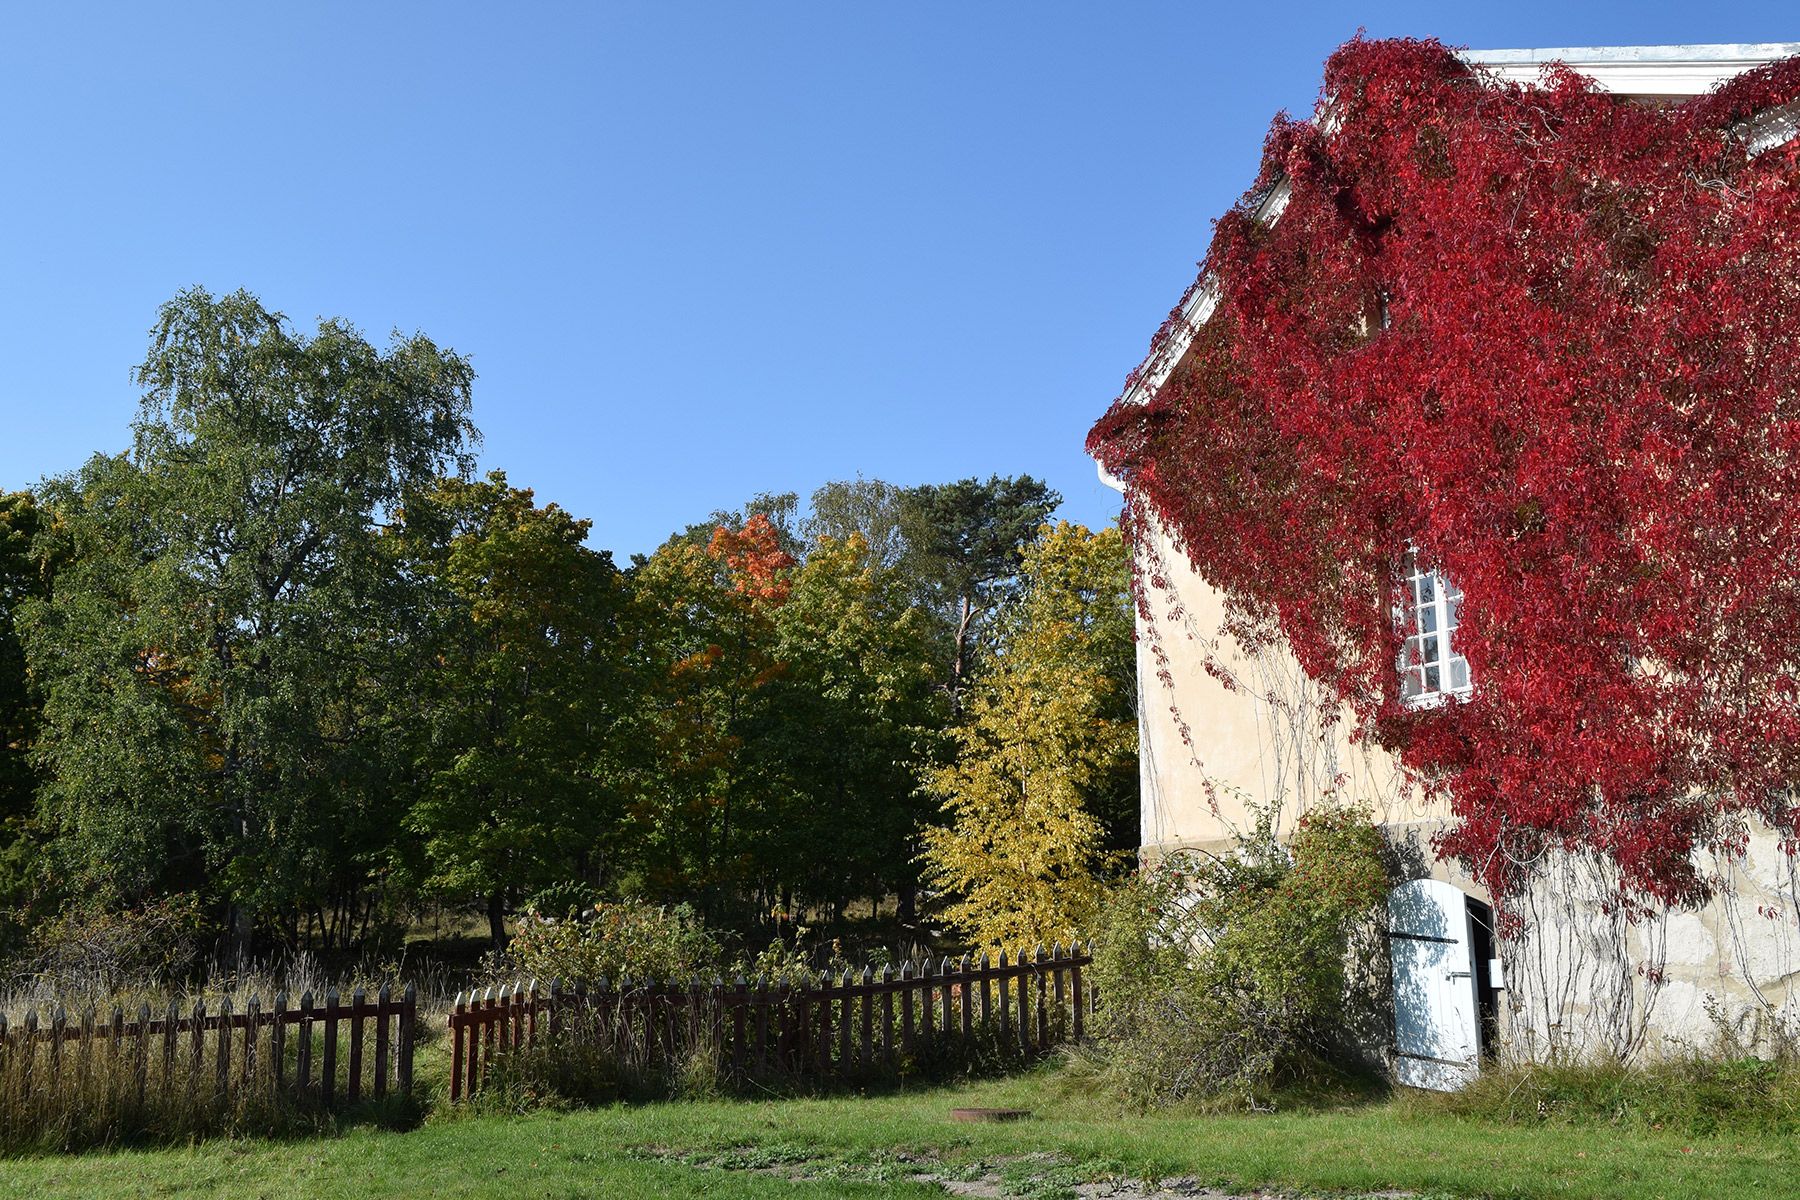 An old building on the island of Seili, covered in a red vine.